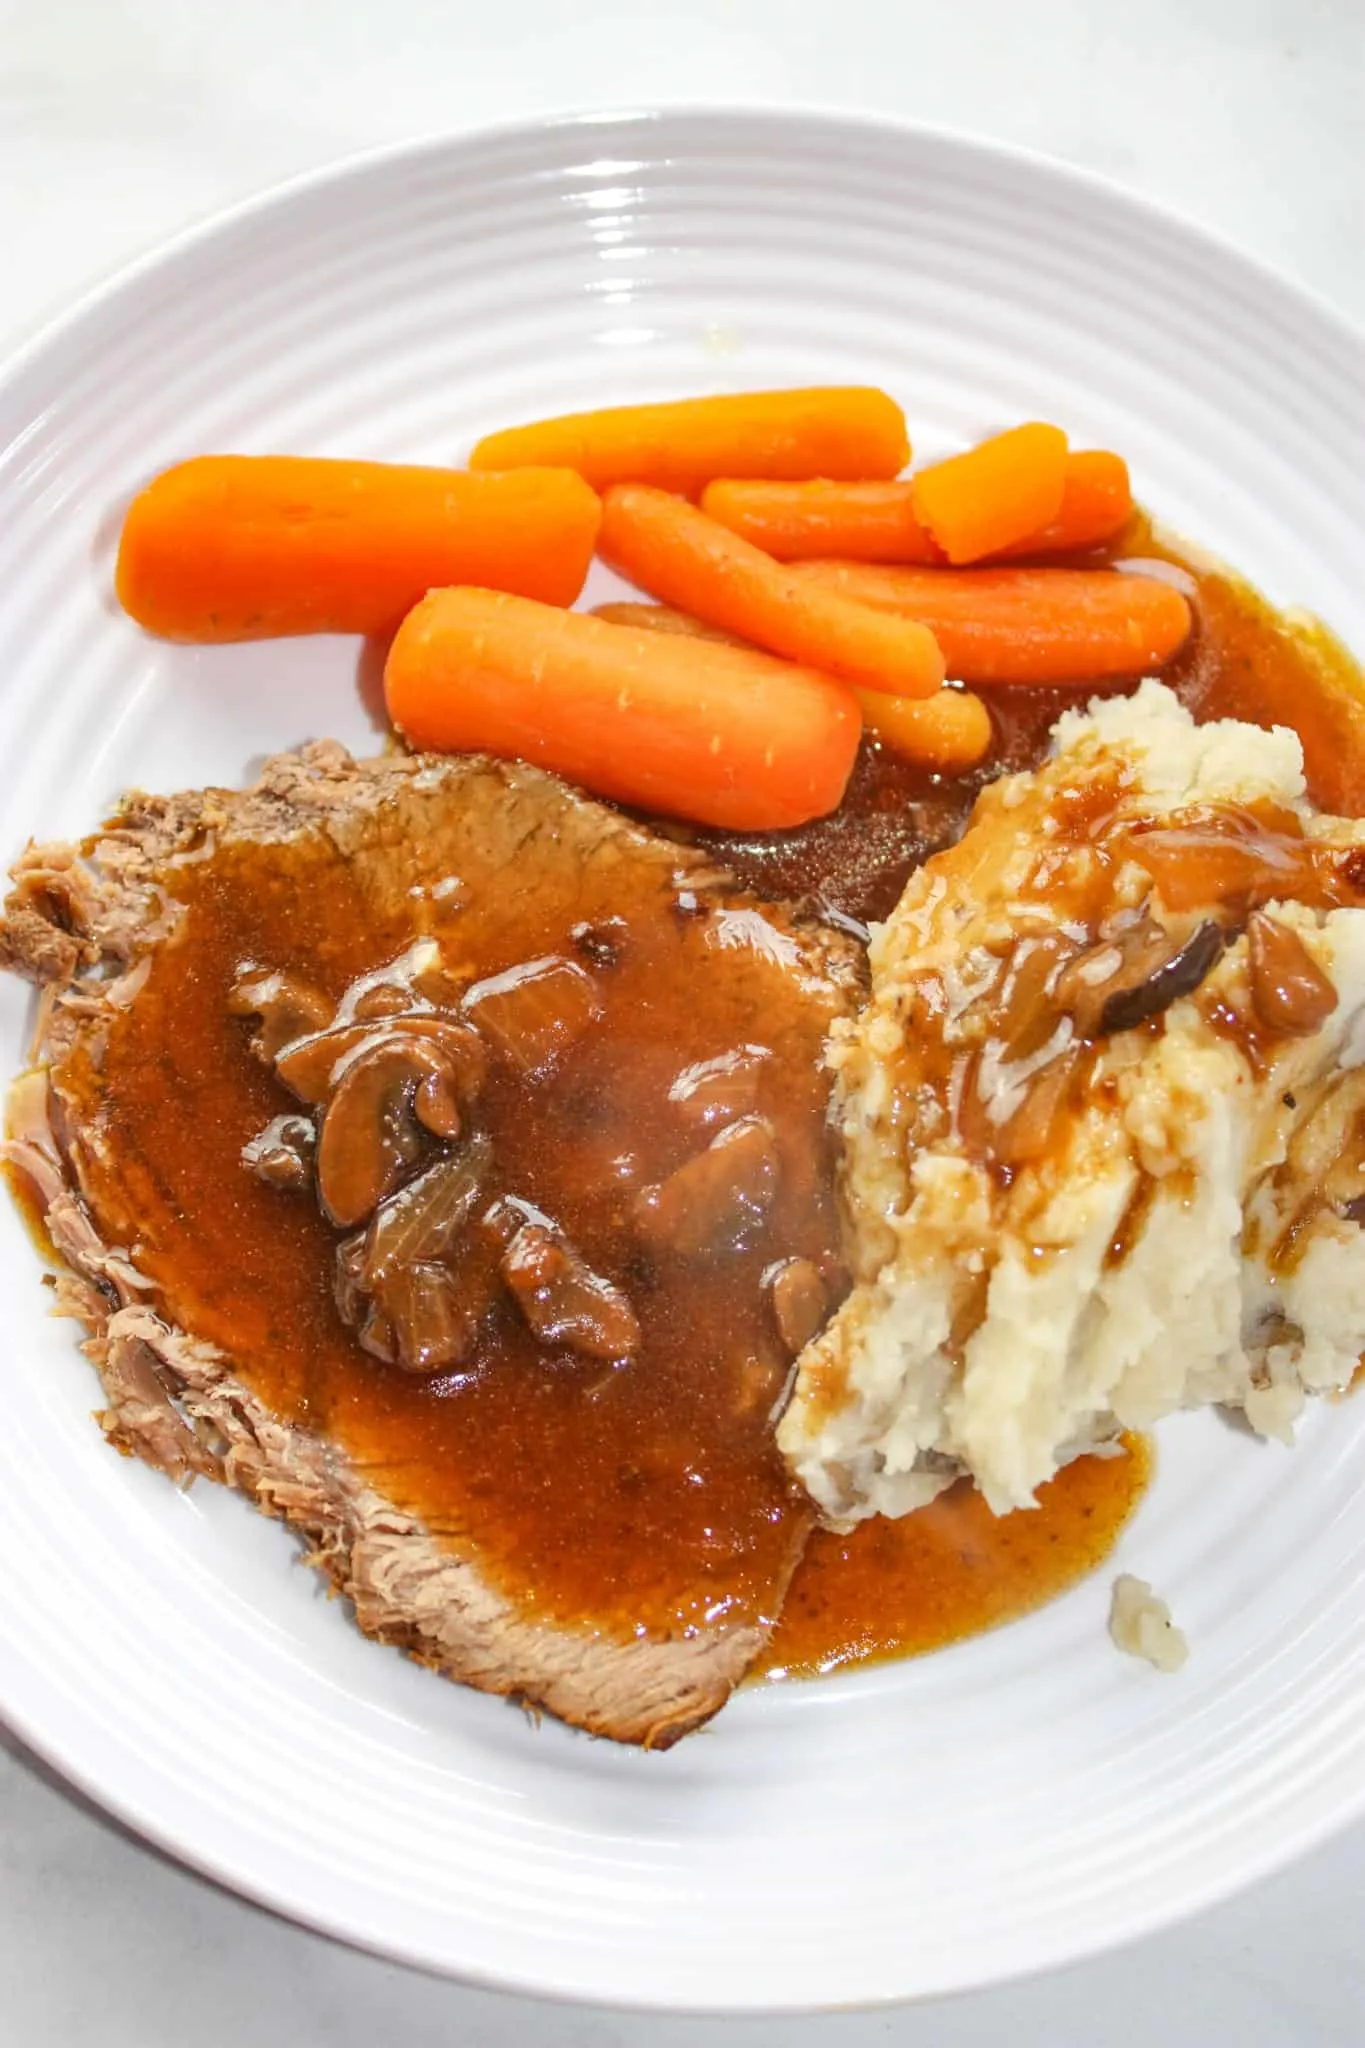 Sunday dinner is served in a fraction of the time!  Instant Pot Sirloin Tip Roast is so tender and served up with sides of baby carrots and potatoes.  Finish it off by covering it in a gluten free mushroom gravy.